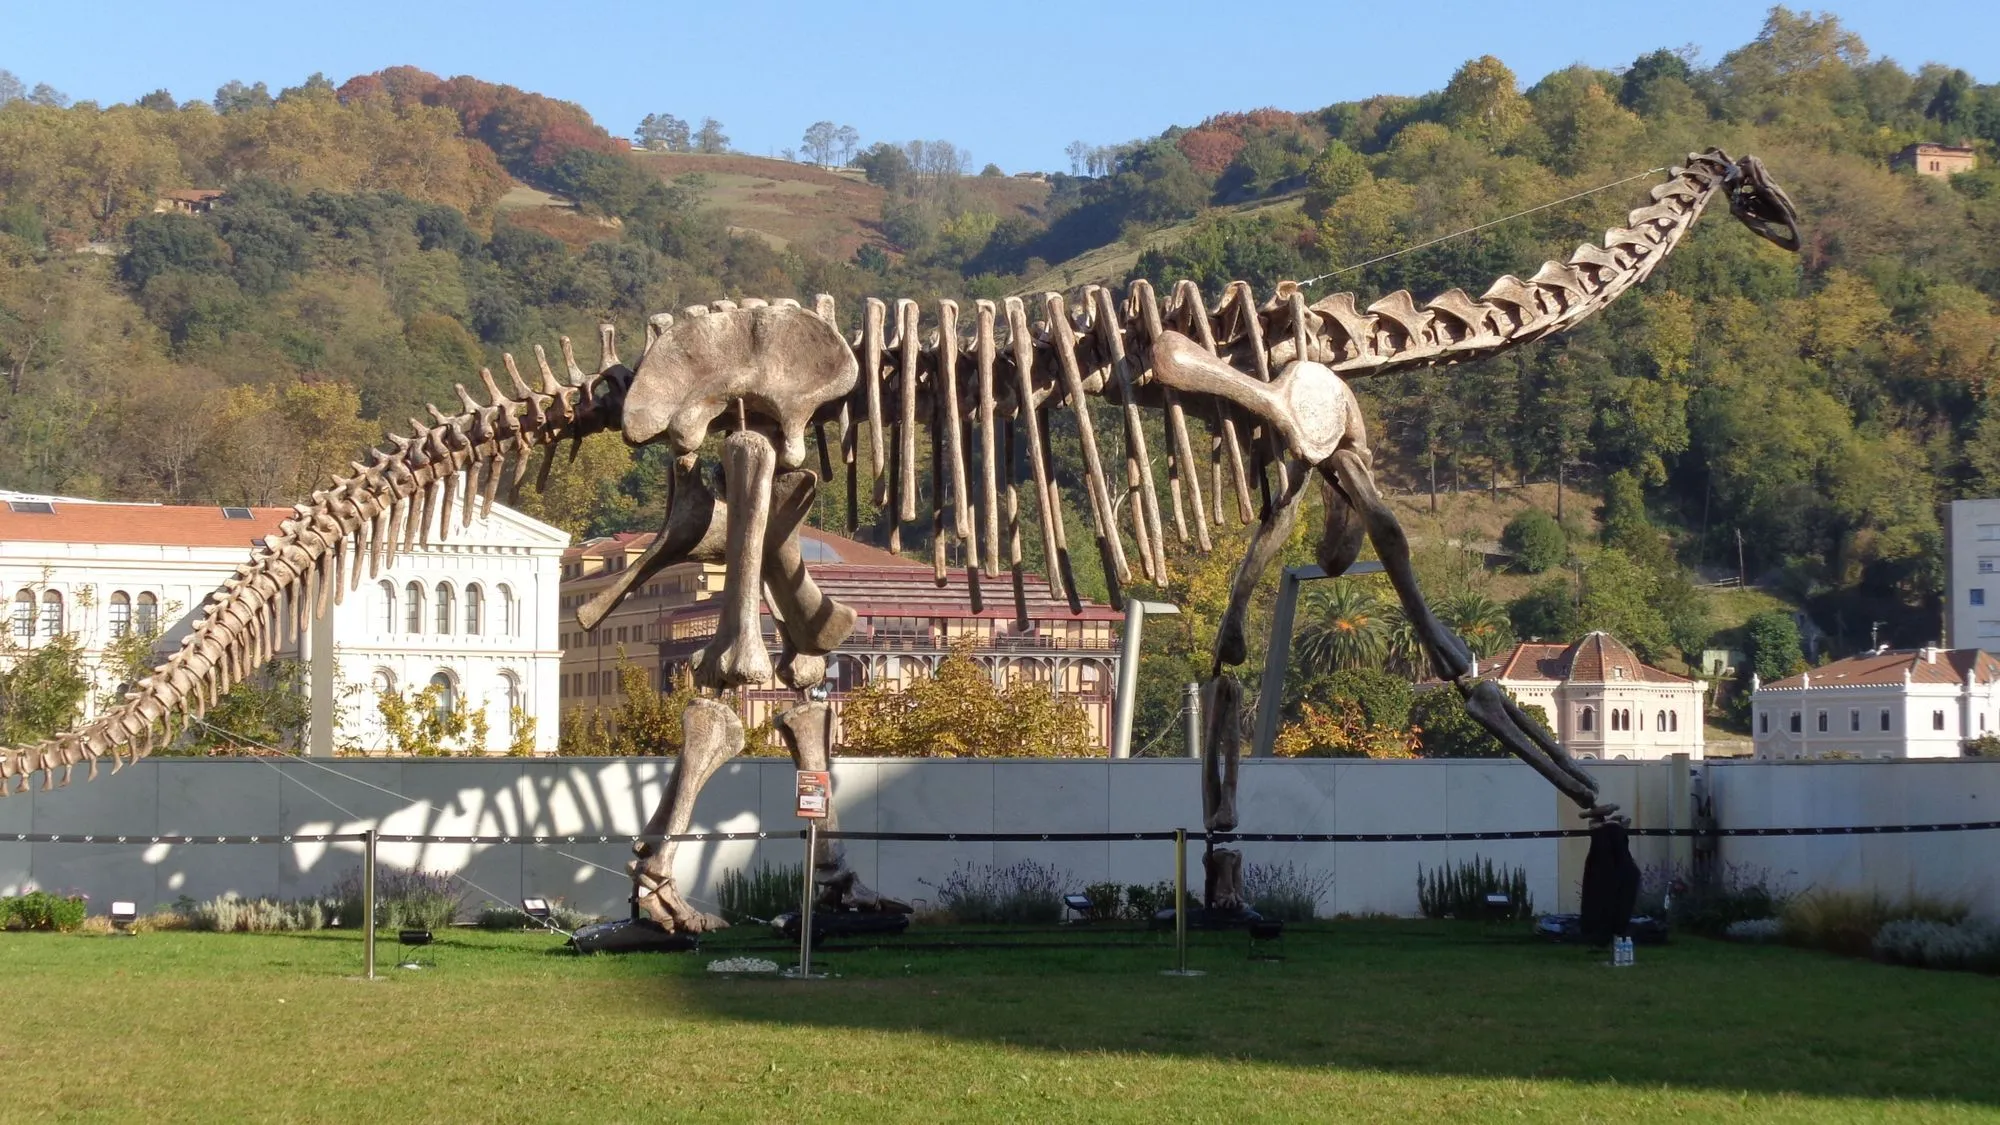 Discover fascinating Turiasaurus facts right here in this article.